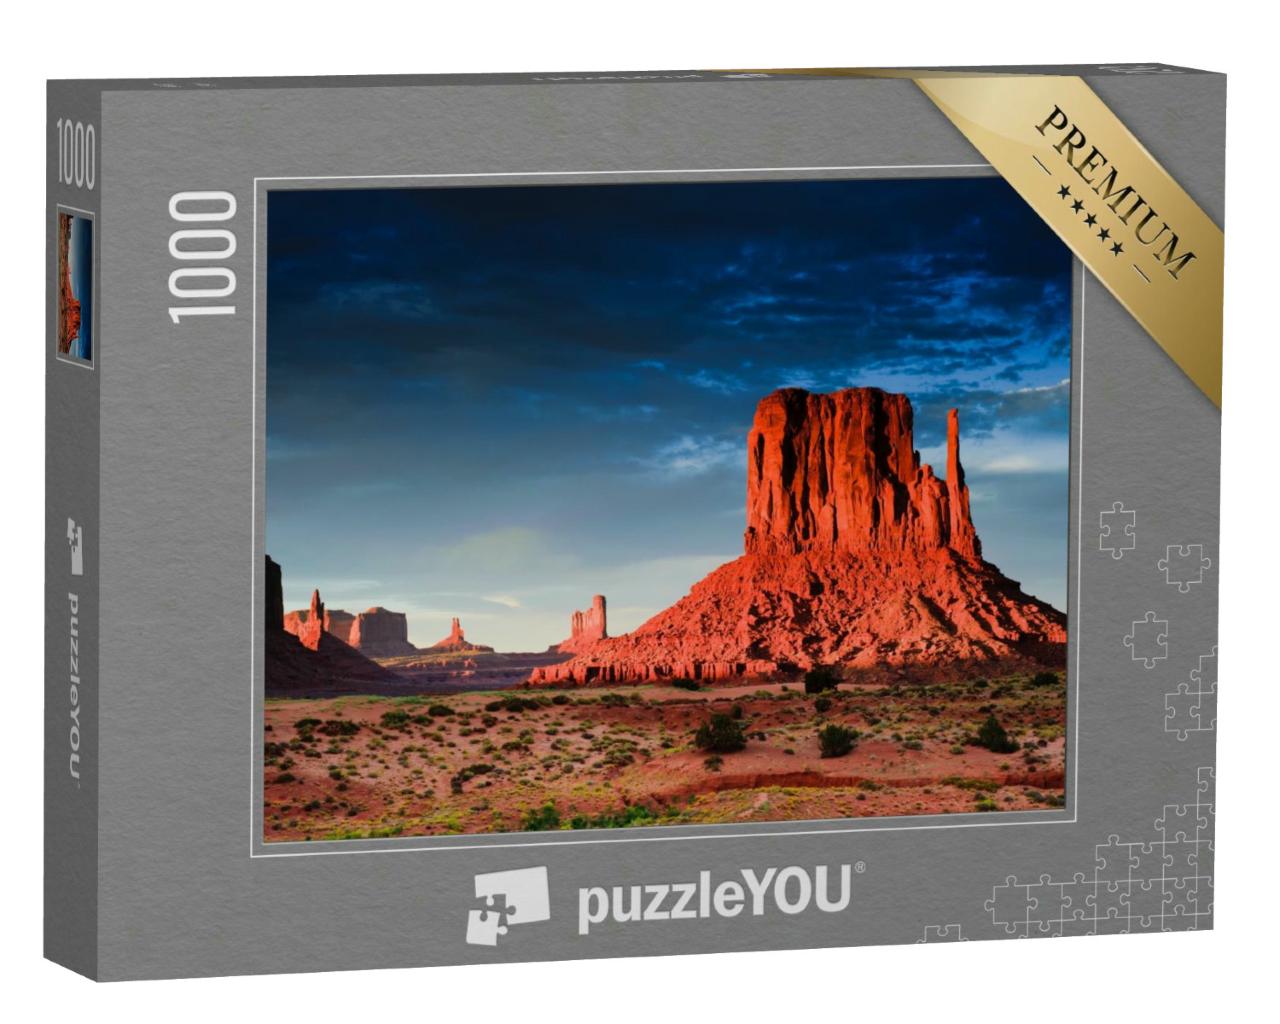 Puzzle 1000 Teile „Monument Valley bei Sonnenuntergang, Utah, USA“